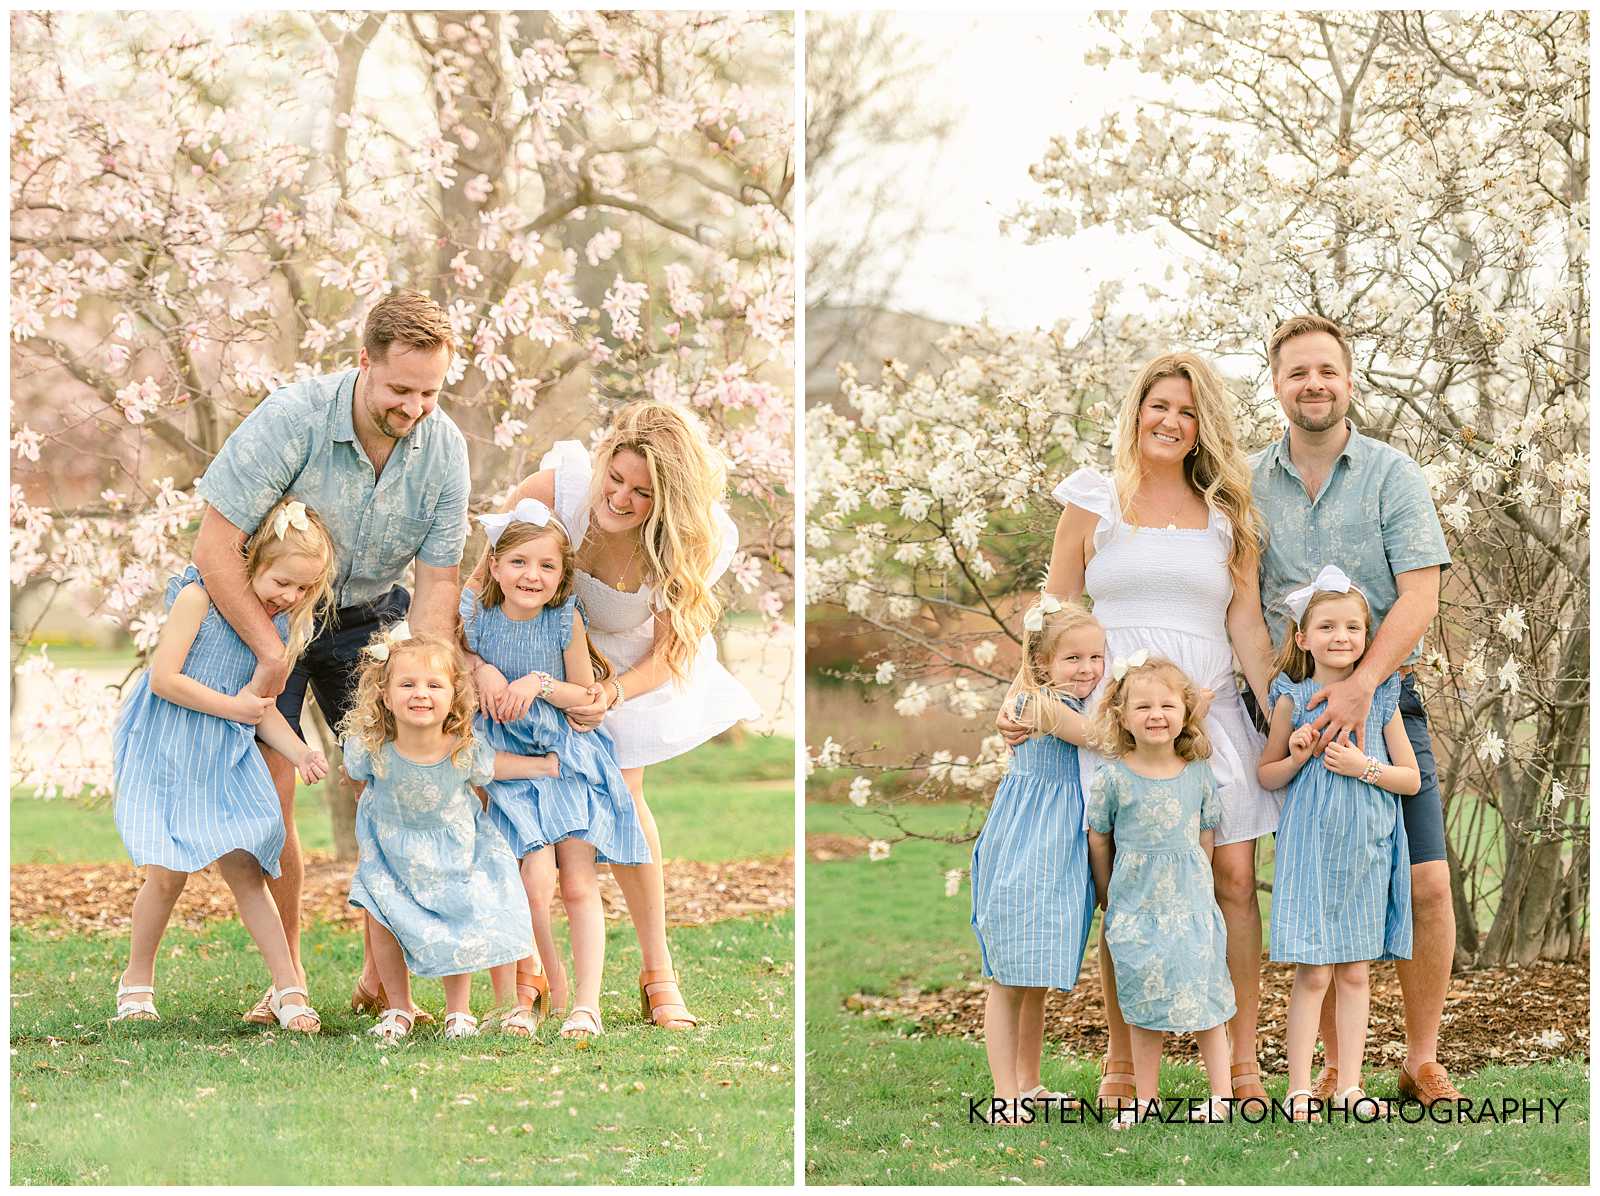 Family with three young daughters standing in front of pink and white star magnolia blossoms